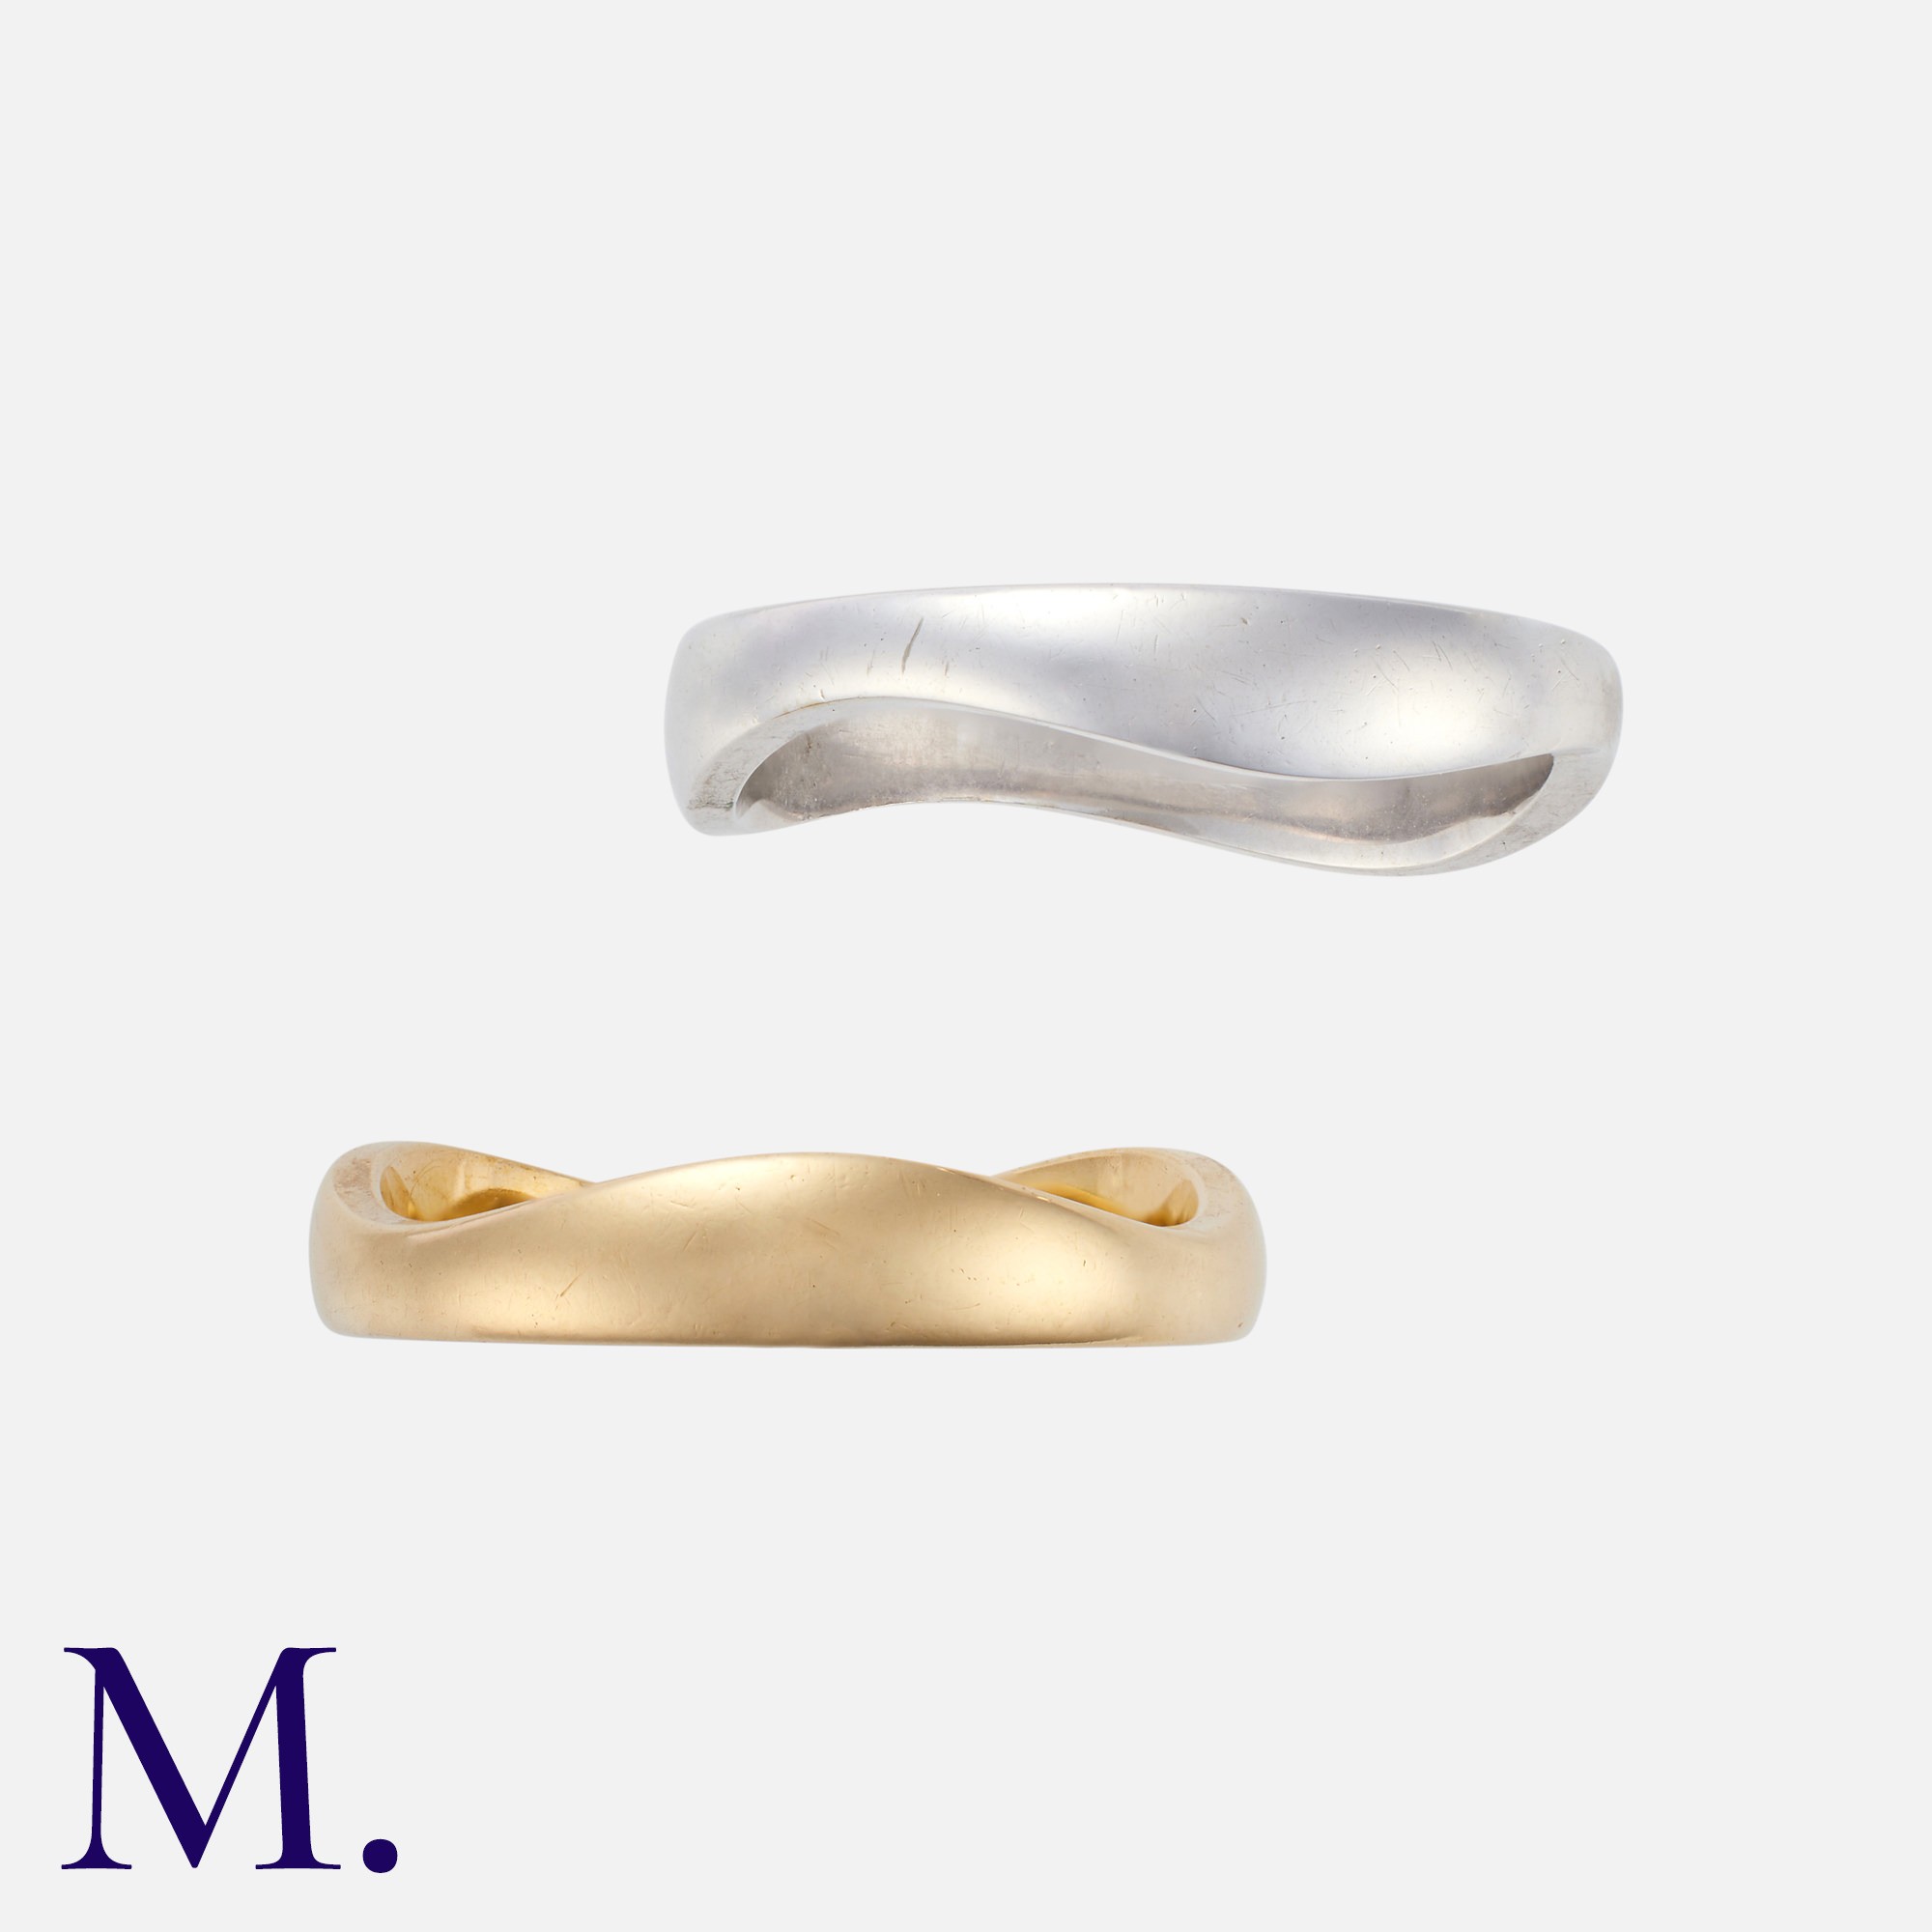 CARTIER. A Pair of Gold Wave Bands in 18K white and yellow gold, of separate interlocking bands. - Image 2 of 3